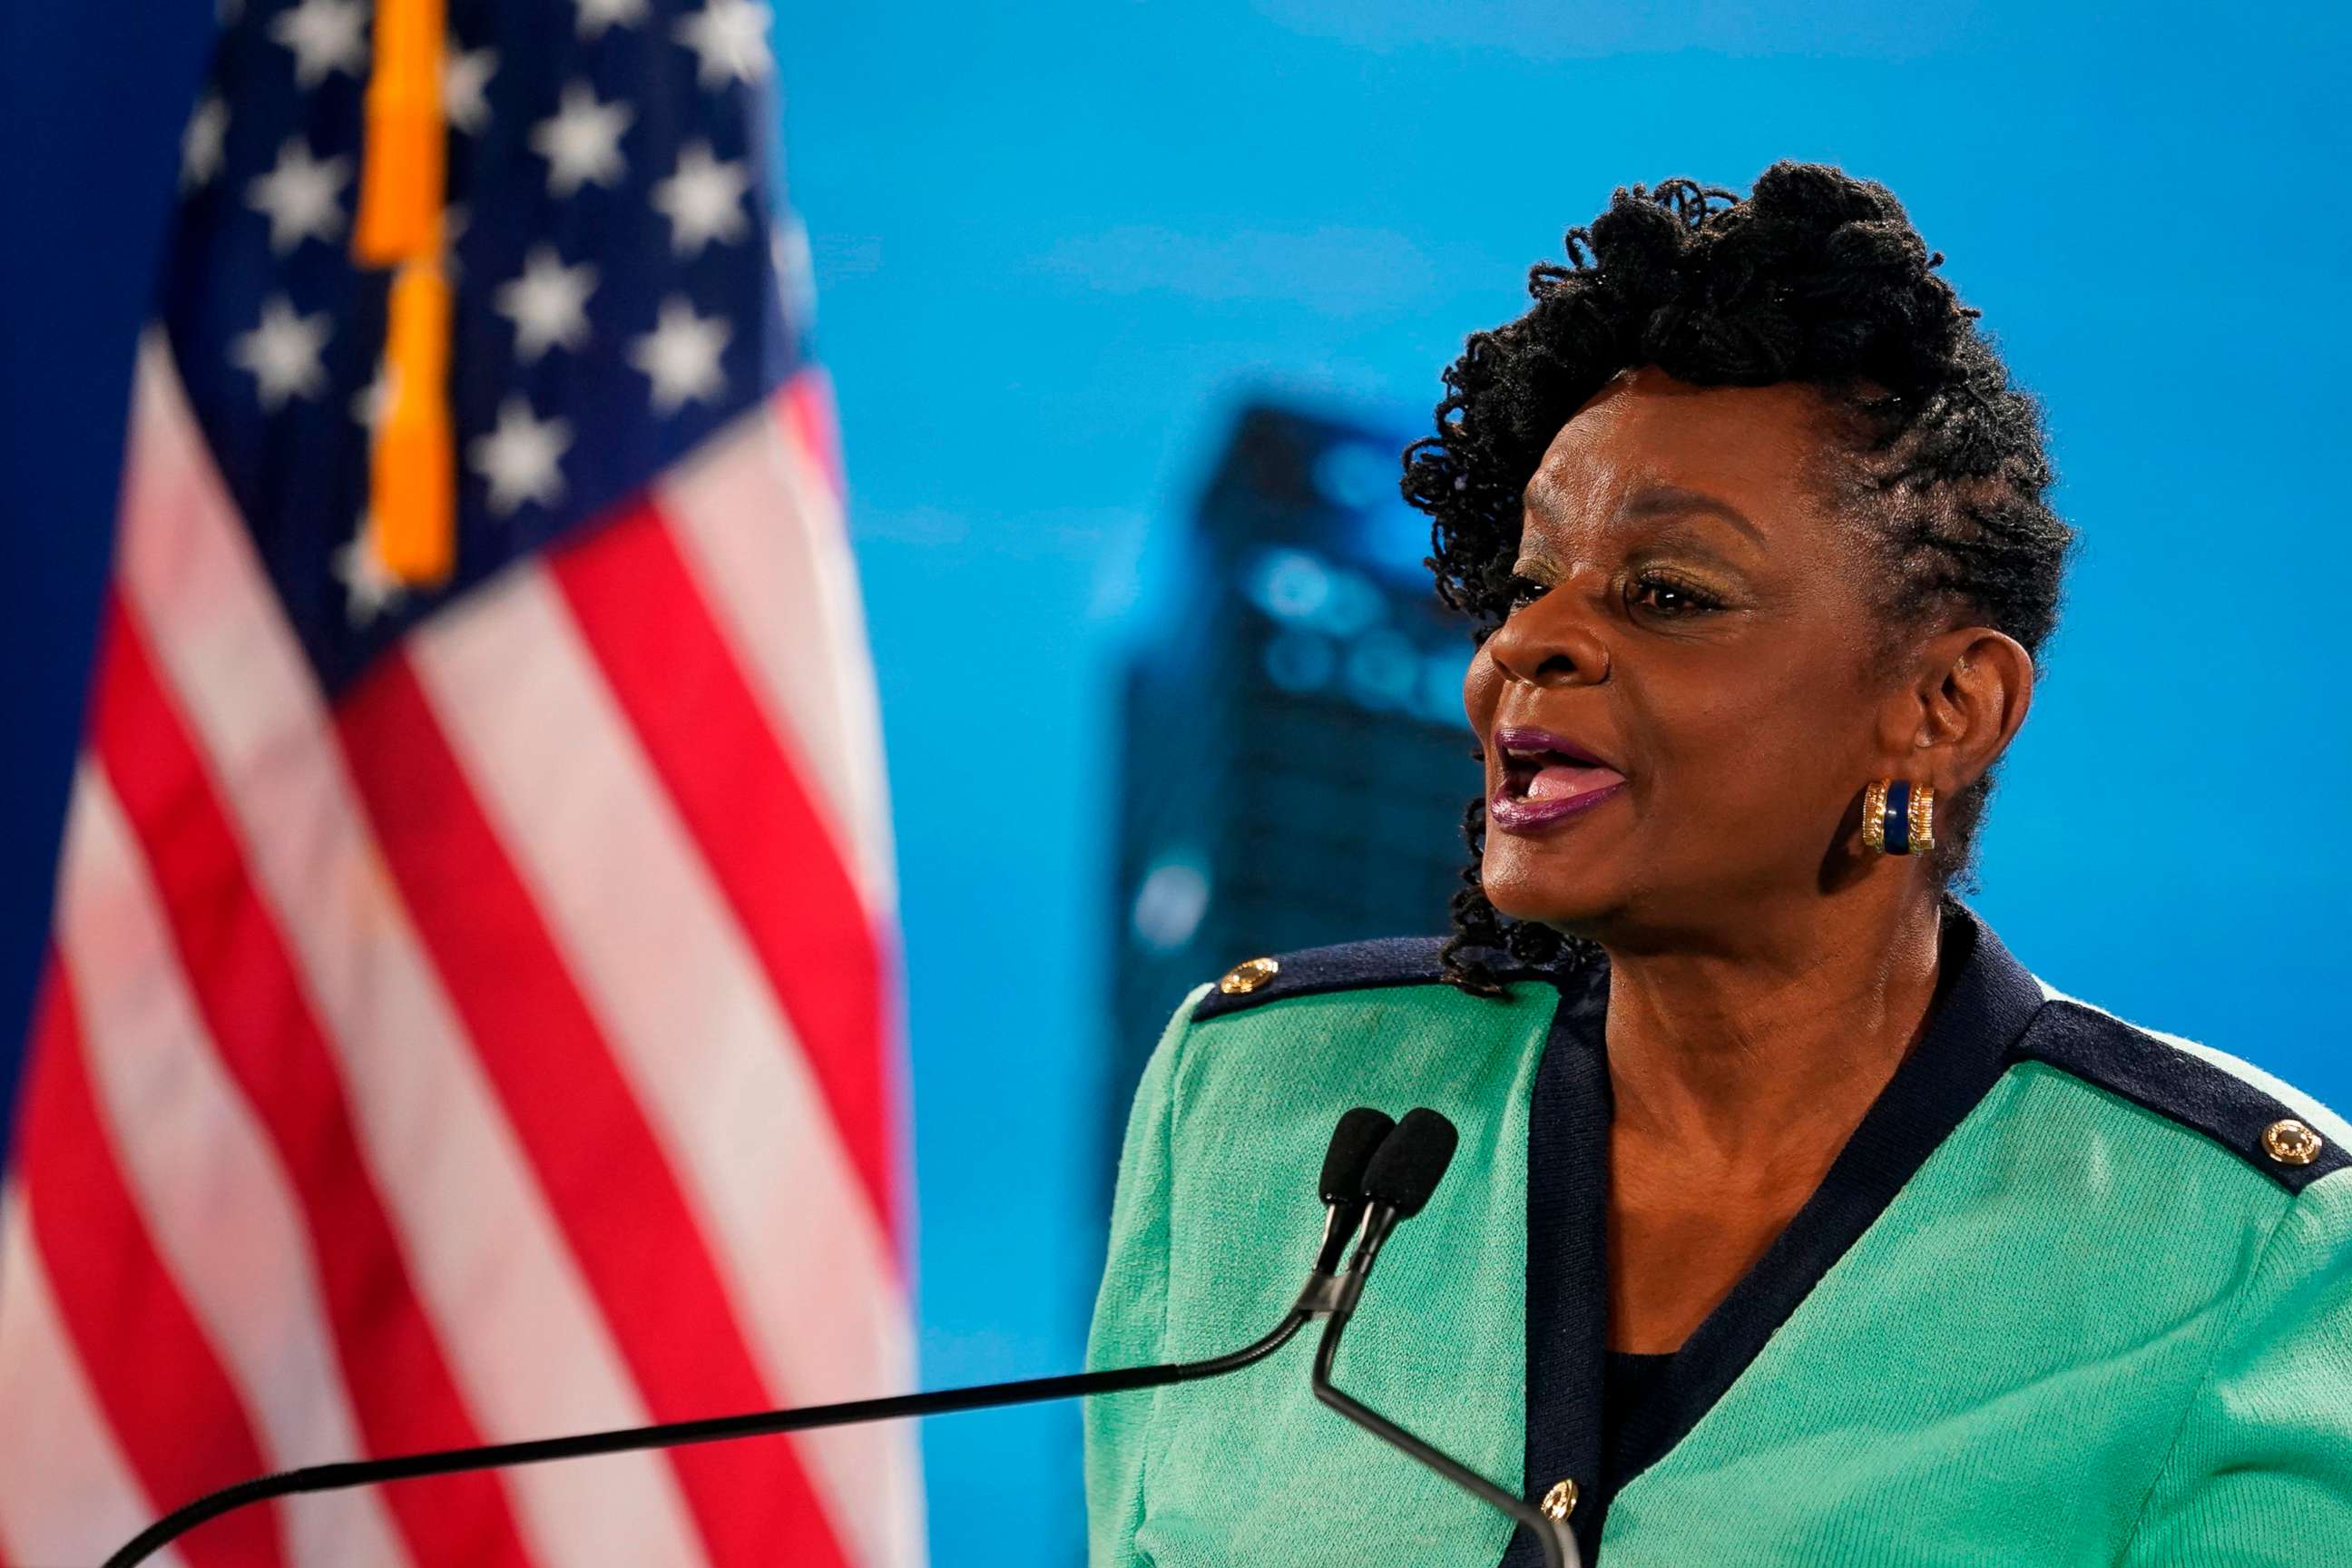 PHOTO: Rep. Gwen Moore, D-Wisc., speaks during the opening night of the Democratic National Convention, being held virtually amid the novel coronavirus pandemic, in Milwaukee, Aug. 17, 2020.